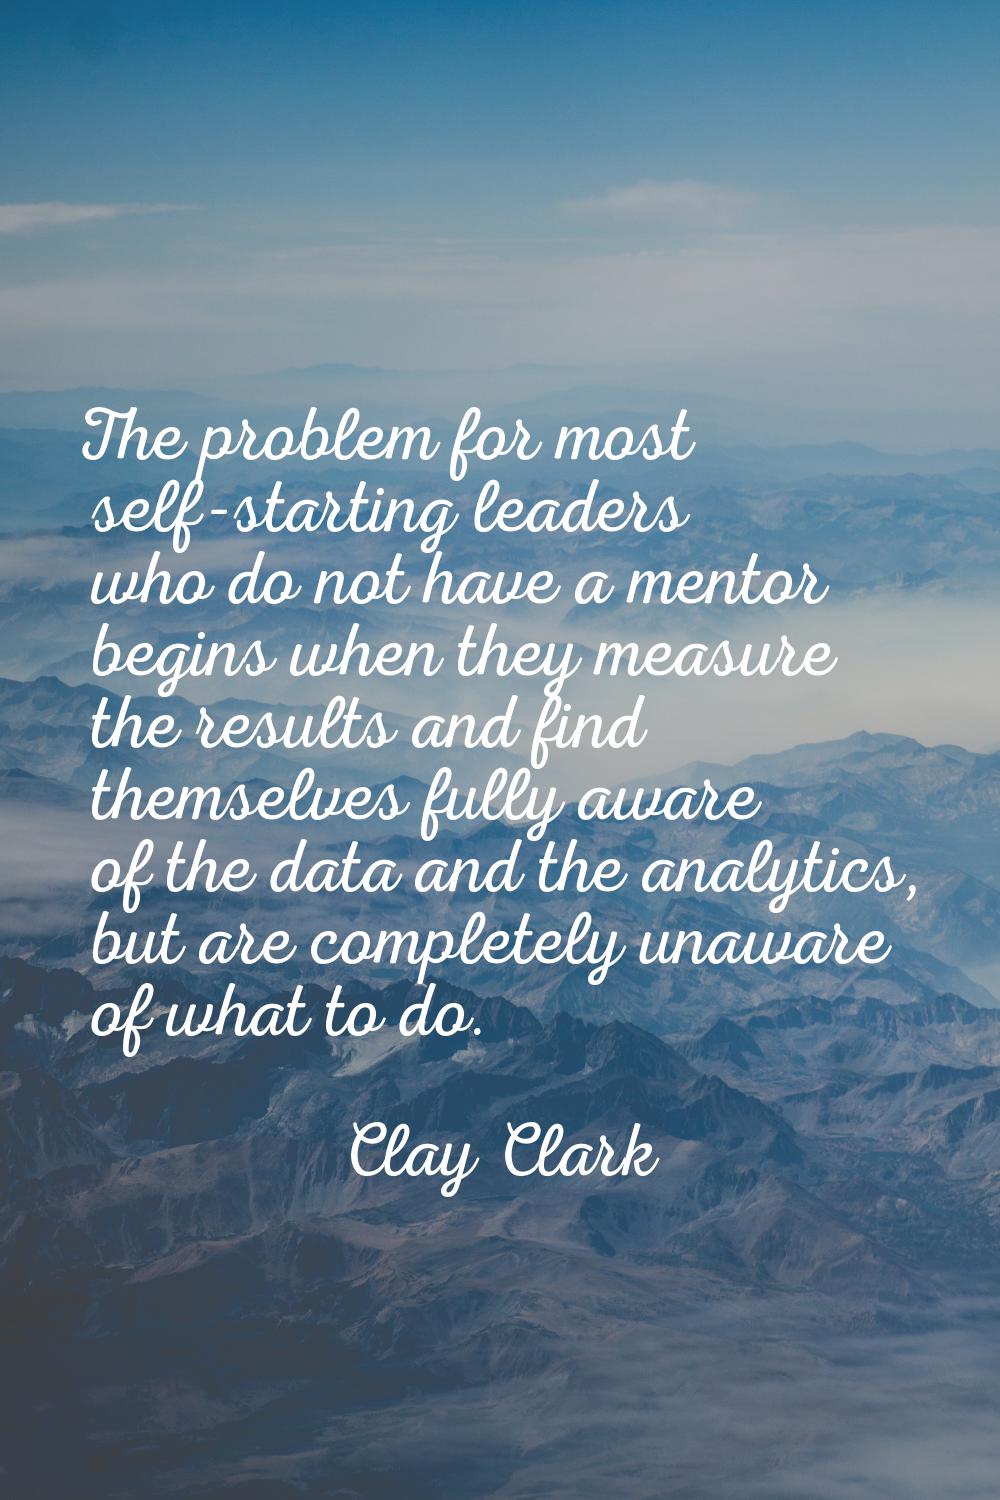 The problem for most self-starting leaders who do not have a mentor begins when they measure the re